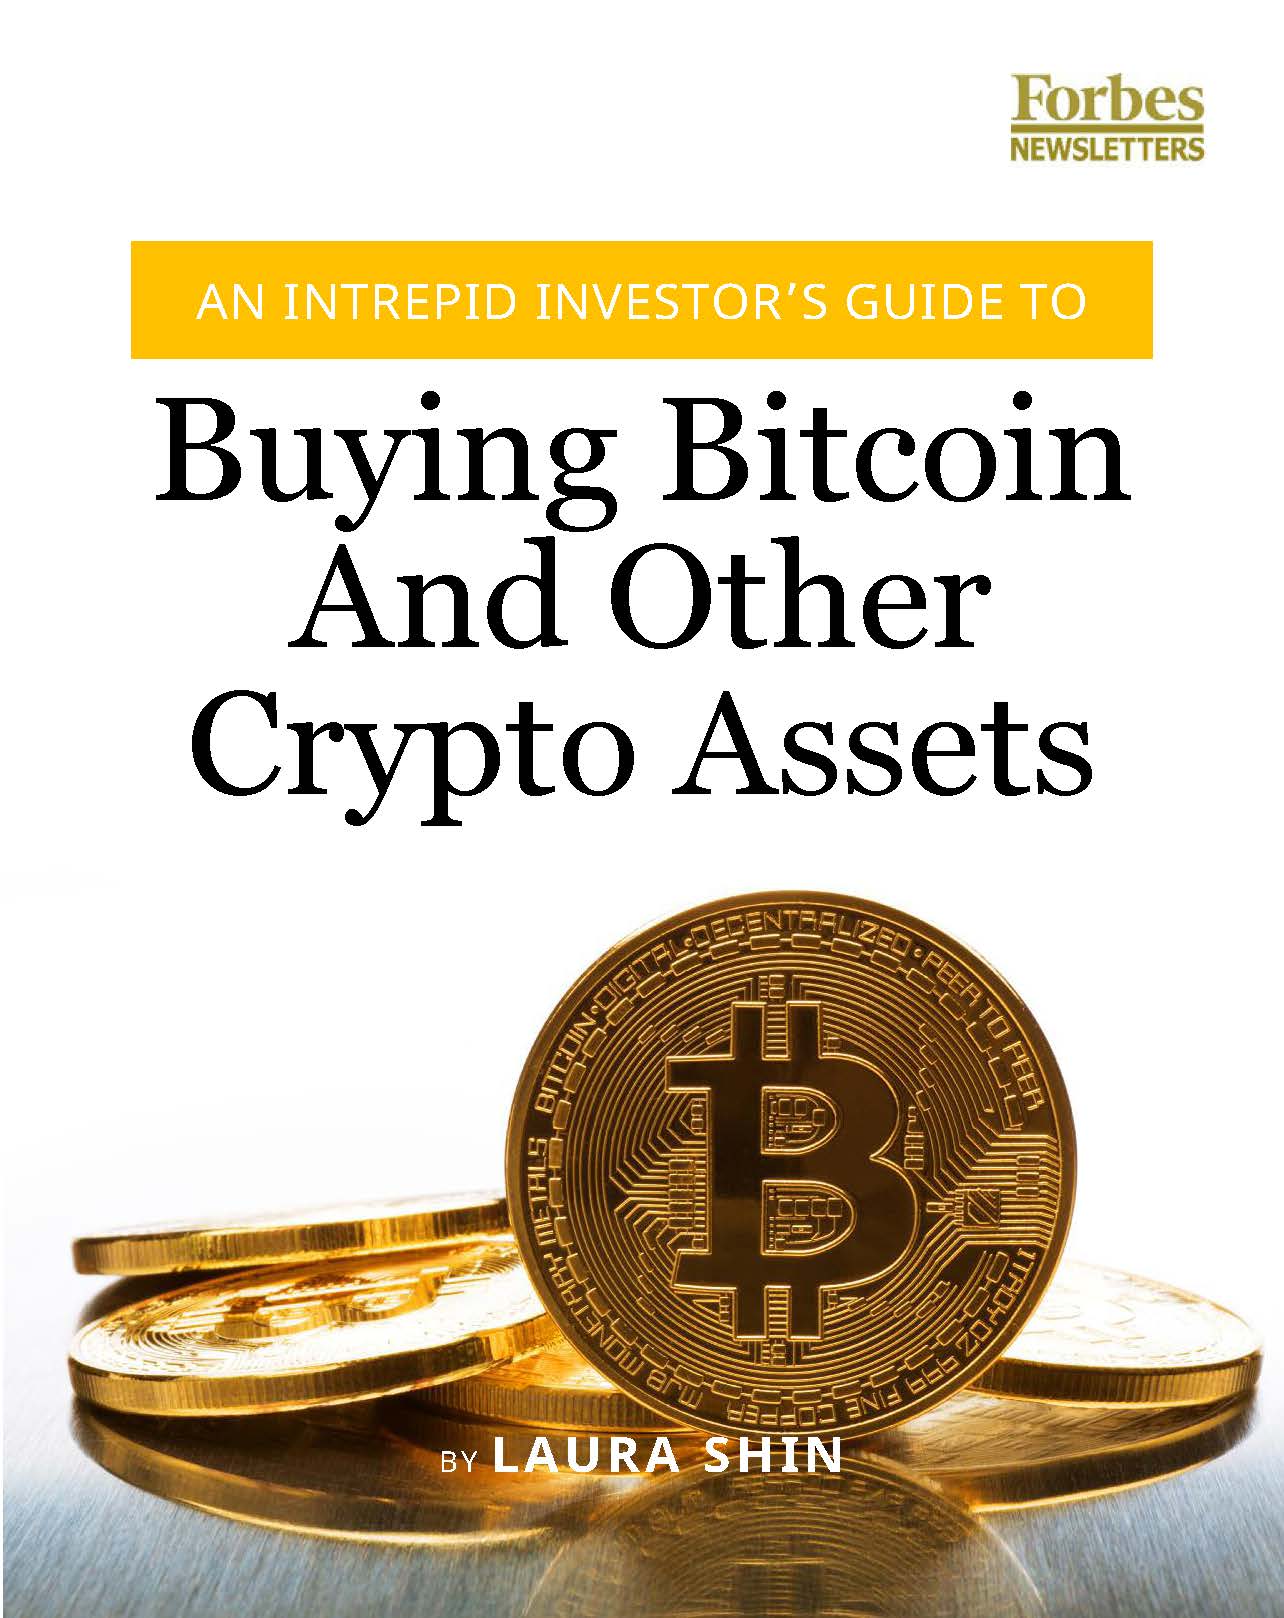 forbes-crypto-newsletter-r04_Page_01.jpg